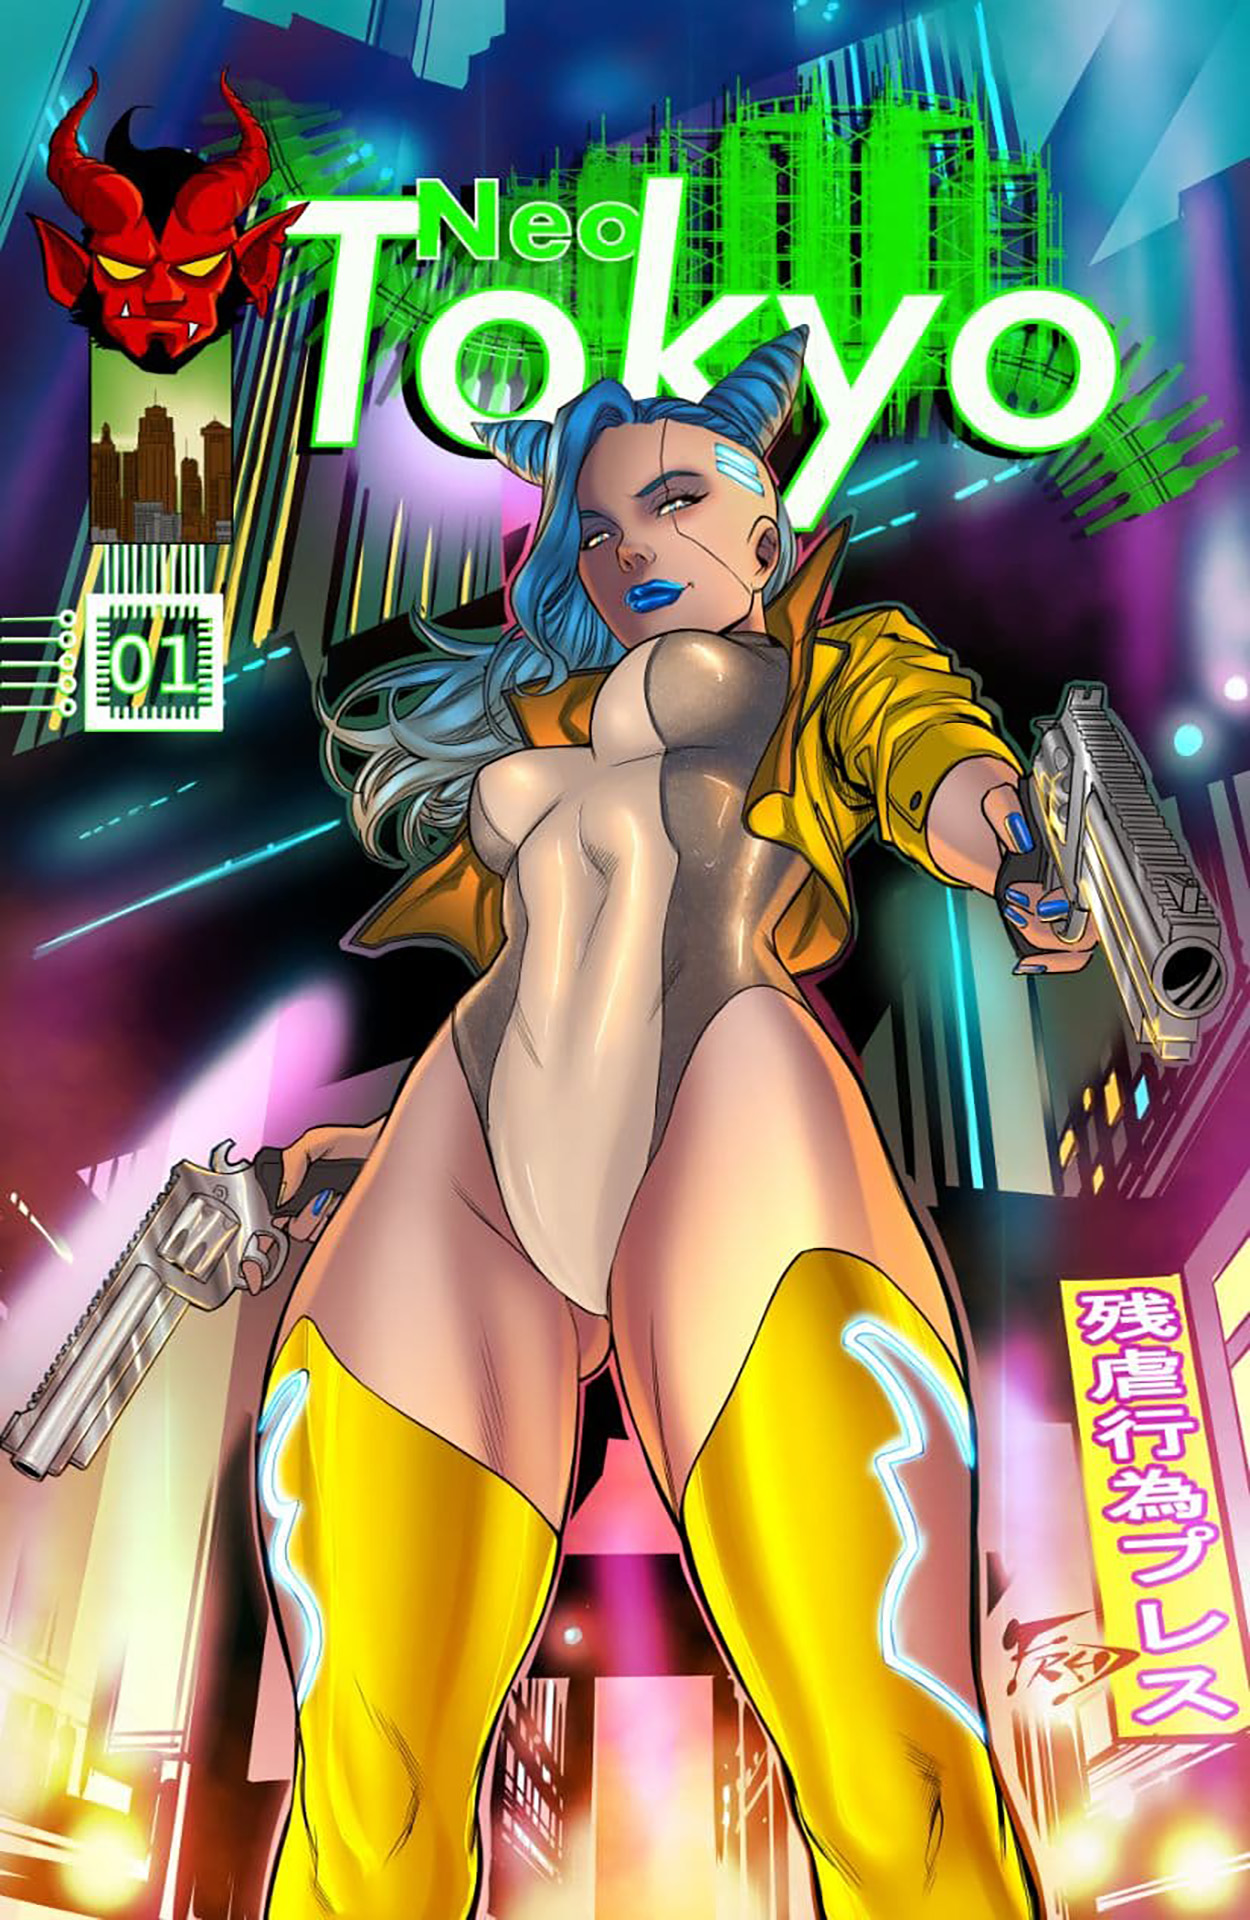 Neo Tokyo: The Truth is a Virus